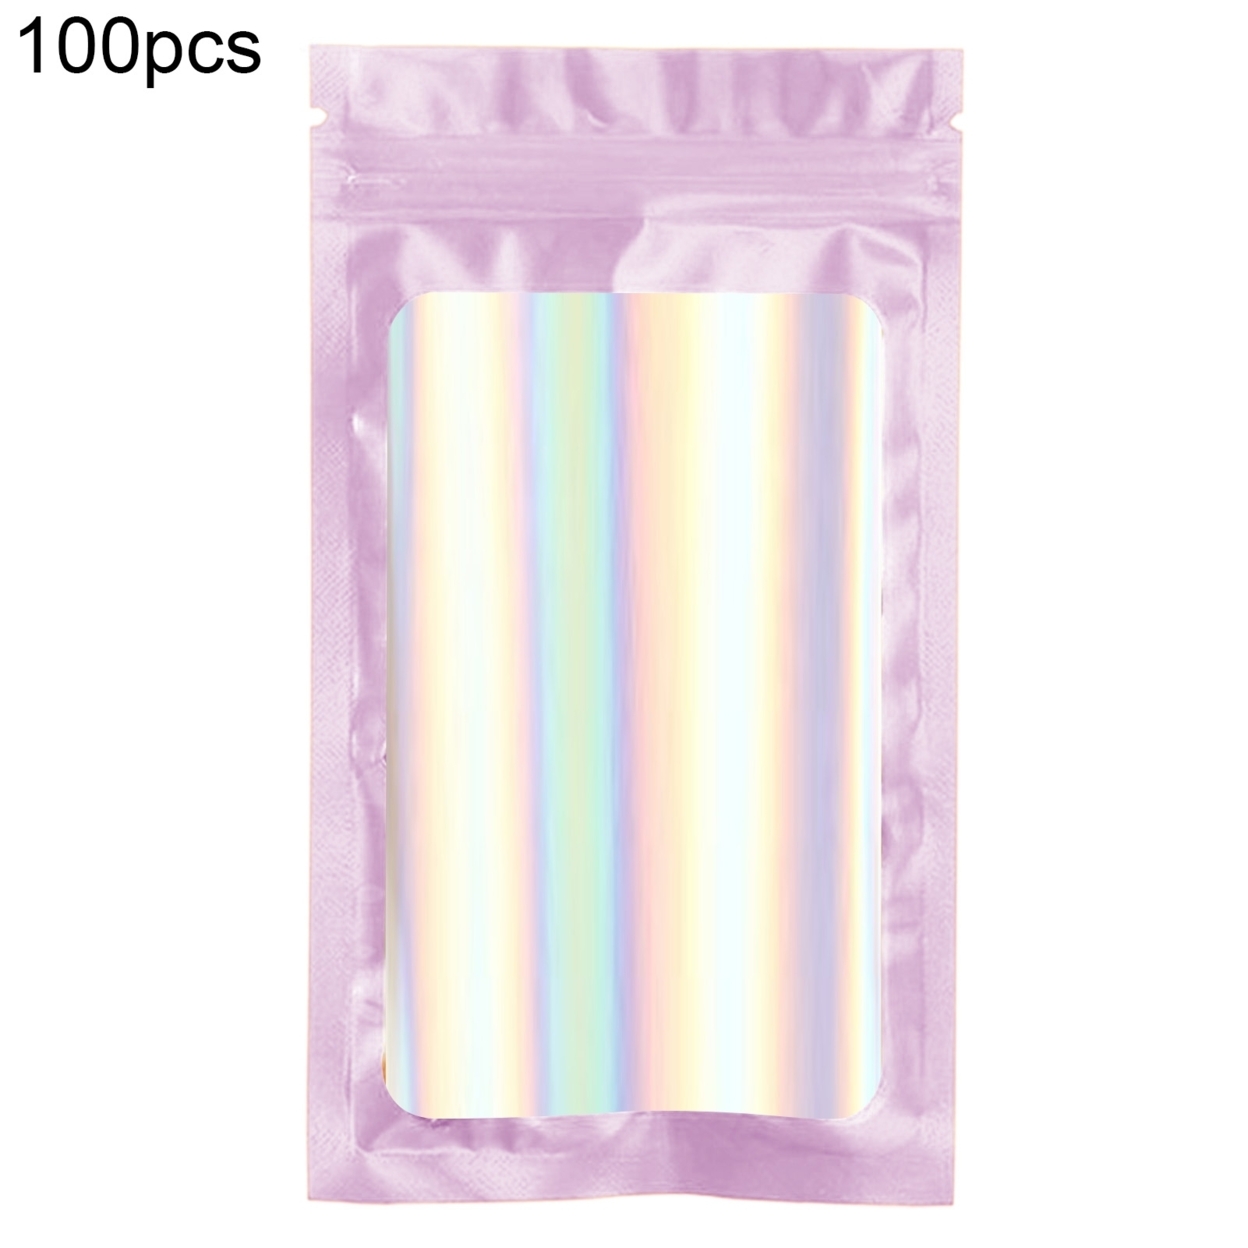 100Pcs/Set Zip-lock Bags Eye-catching Odor Proof Holographic Color Cosmetic Laser Packaging Bags for Kitchen - purple, 10*18cm